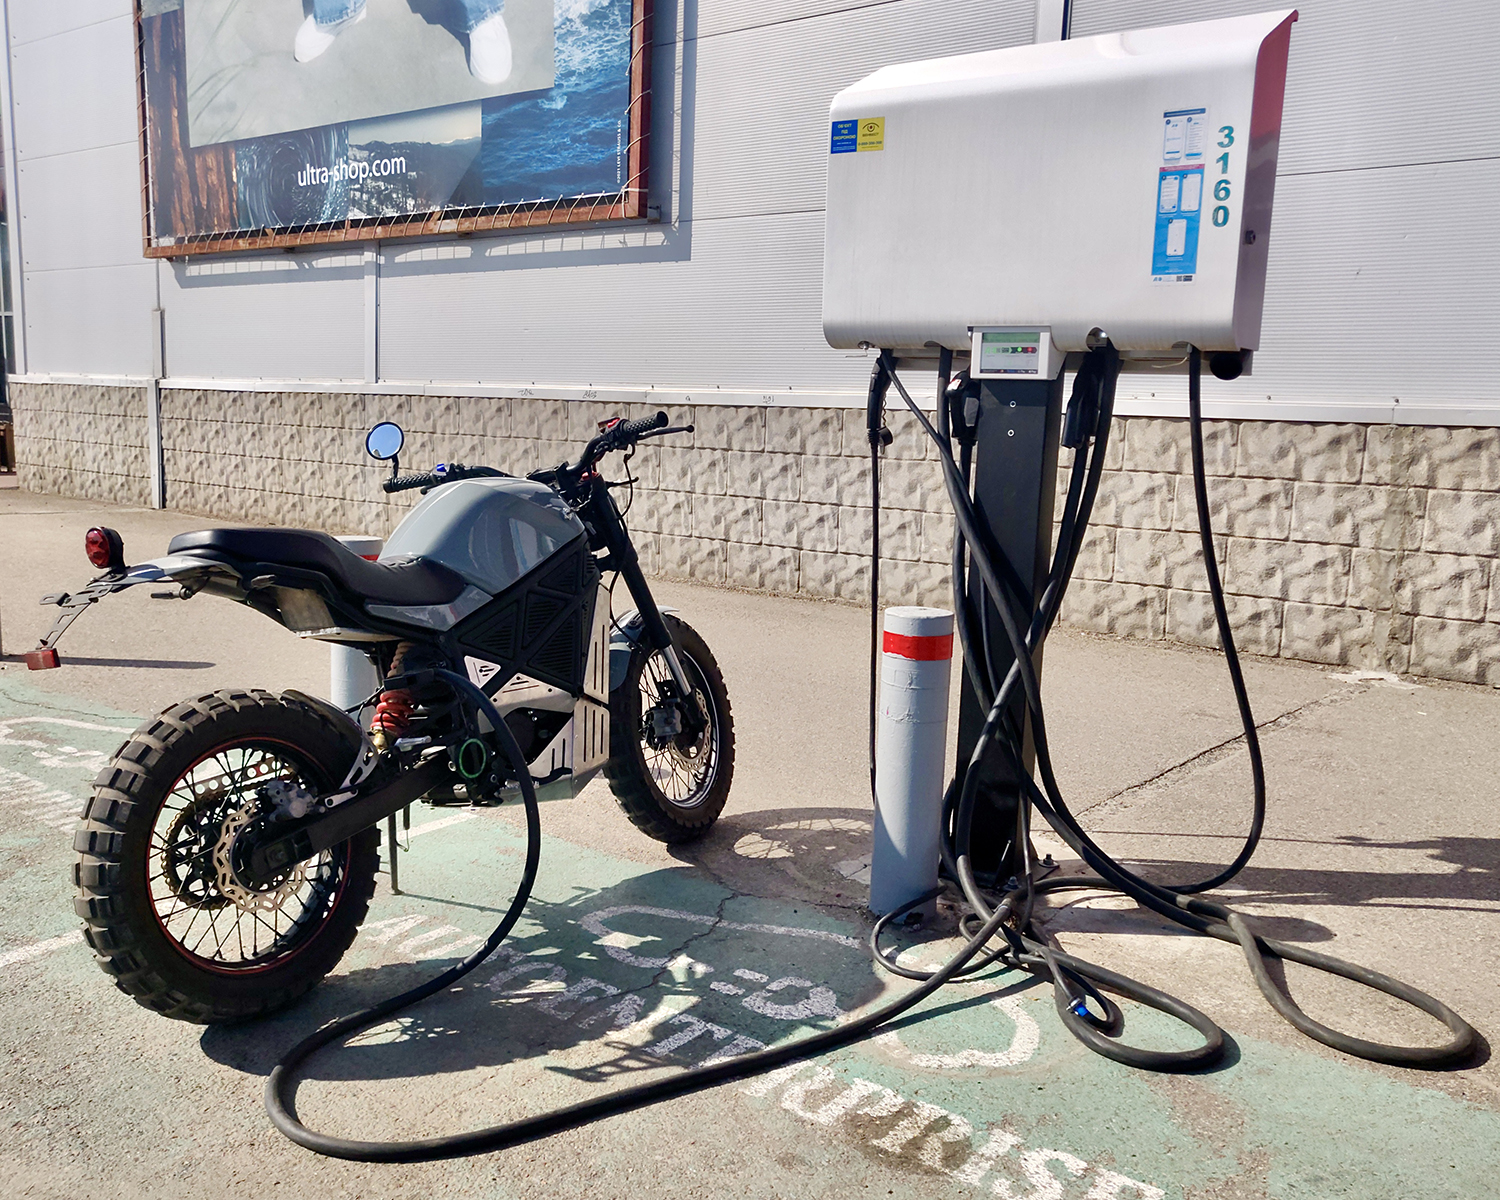 EMGo Launches a $6,000 Motorcycle Compatible With Electric Car Chargers -  webBikeWorld